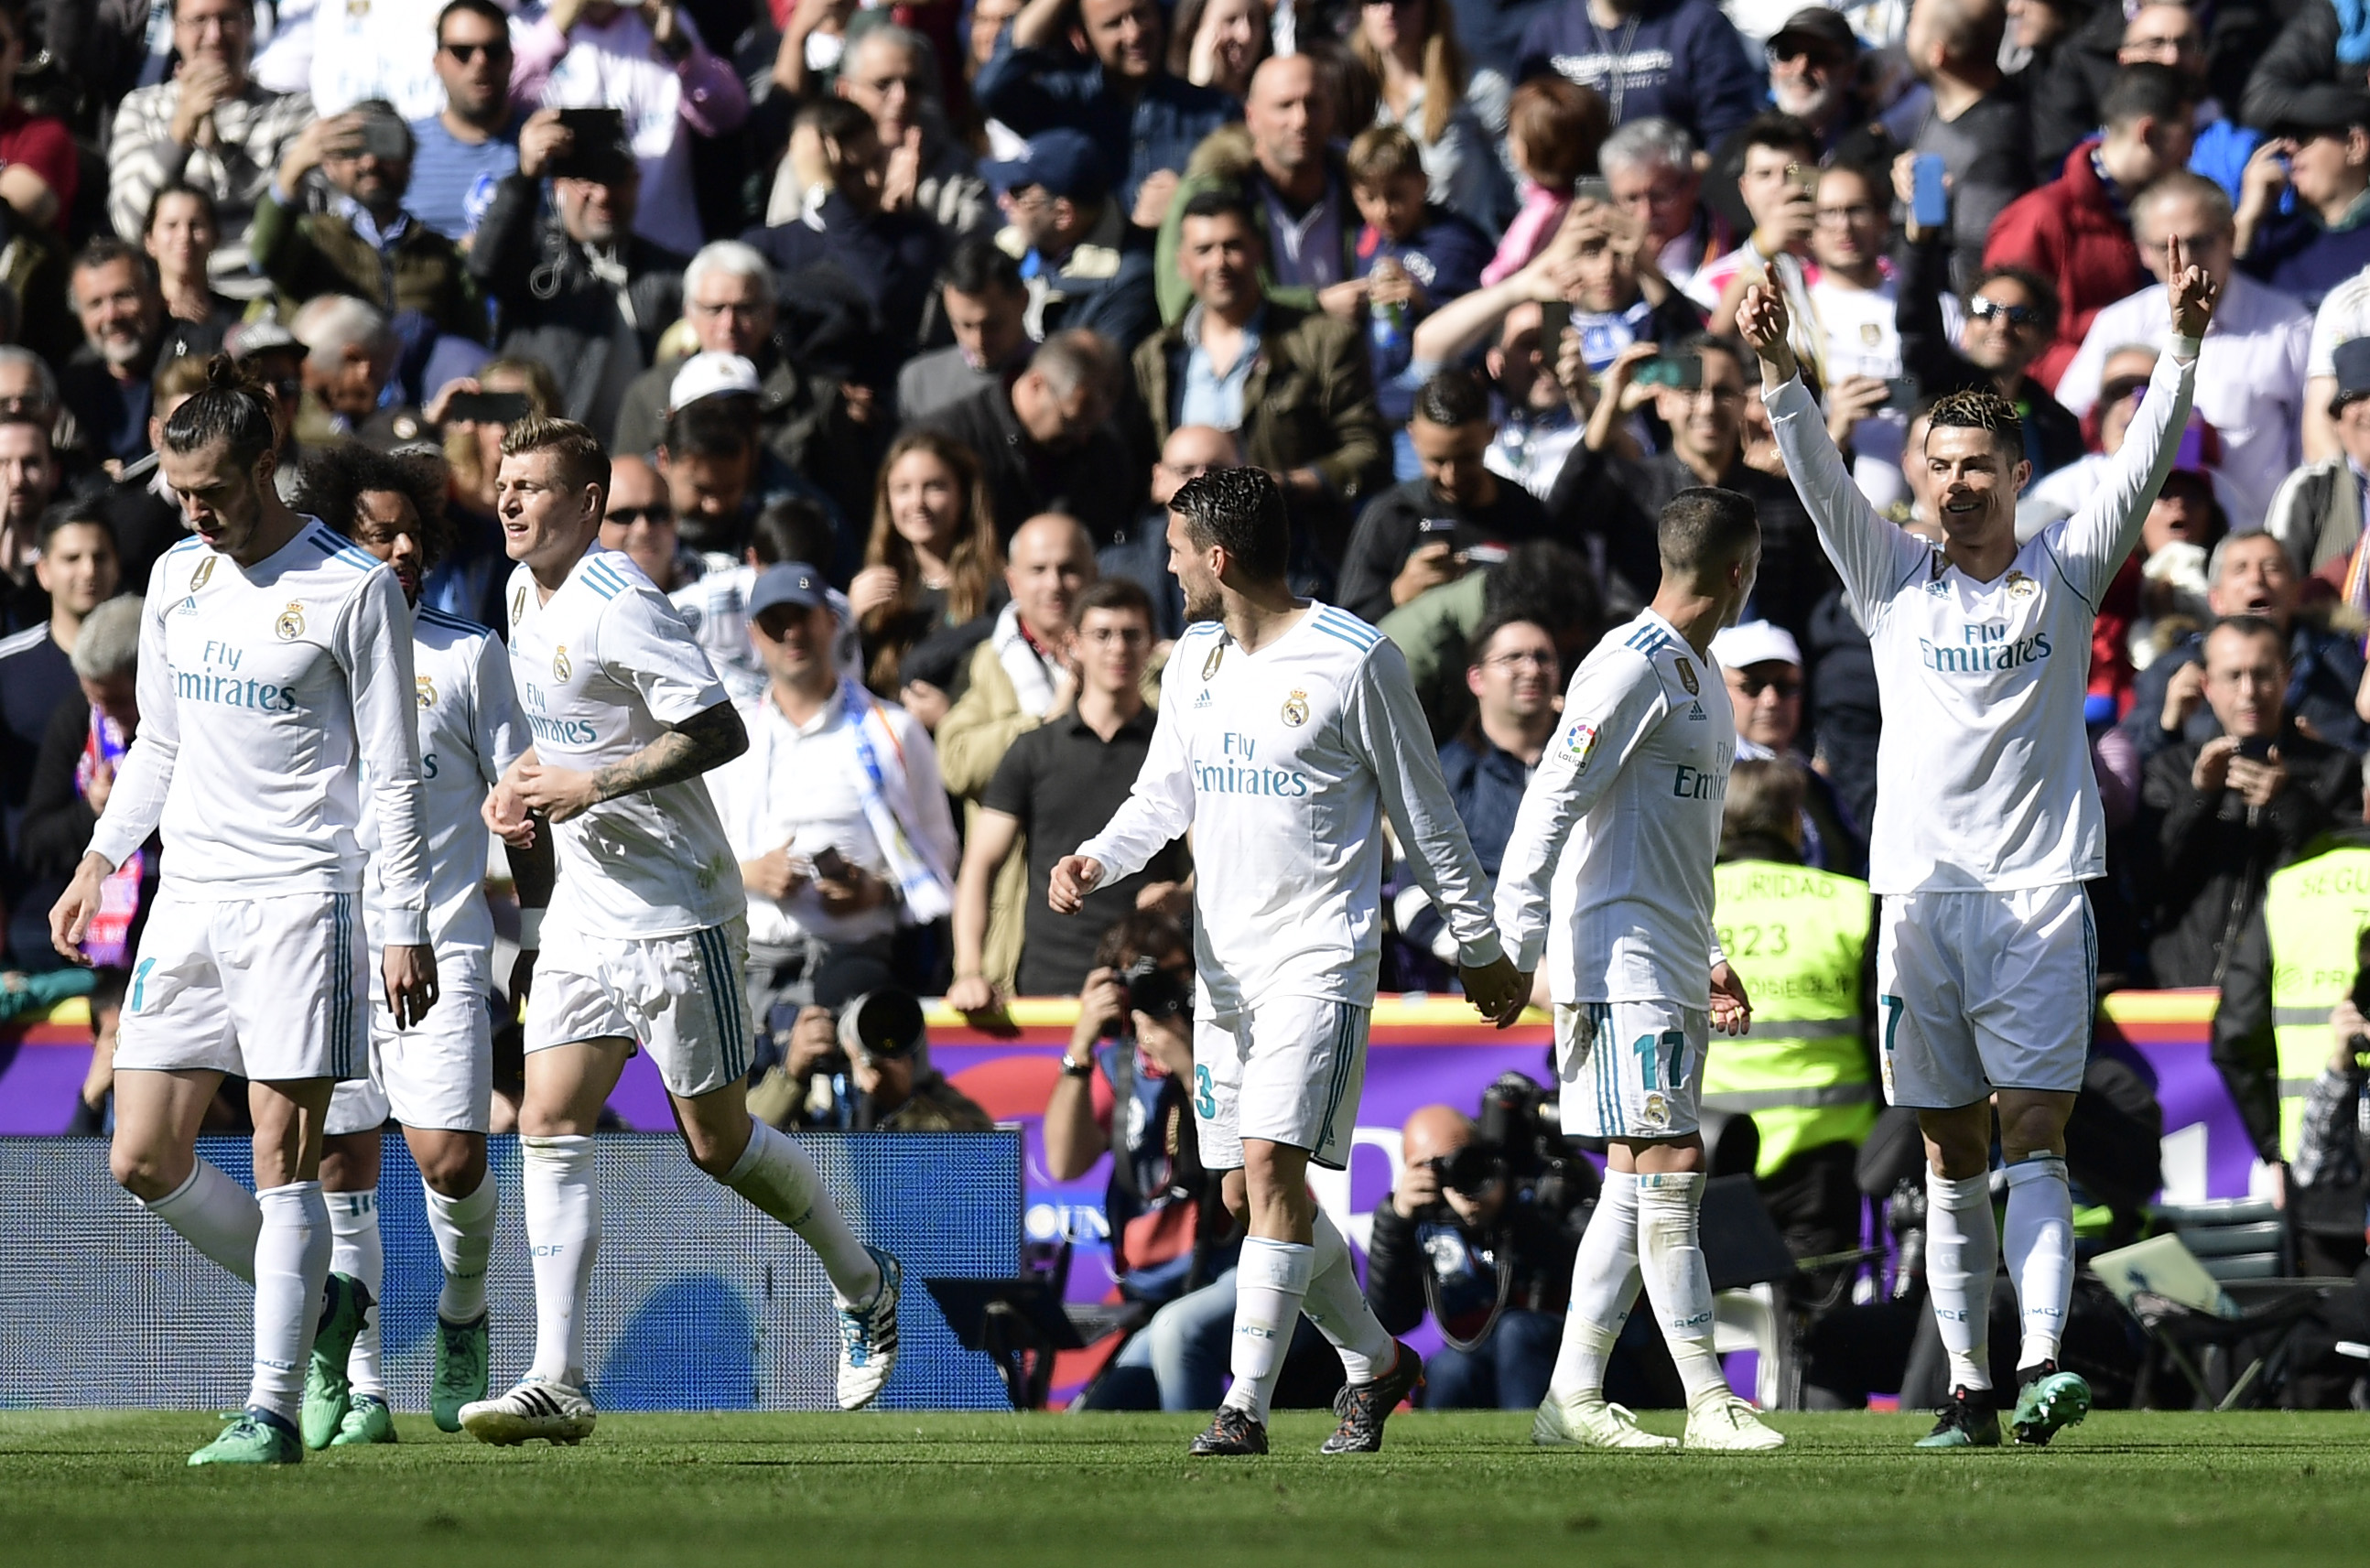 Real Madrid's Portuguese forward Cristiano Ronaldo (R) celebrates a goal during the Spanish league football match between Real Madrid CF and Club Atletico de Madrid at the Santiago Bernabeu stadium in Madrid on April 8, 2018. / AFP PHOTO / JAVIER SORIANO        (Photo credit should read JAVIER SORIANO/AFP/Getty Images)